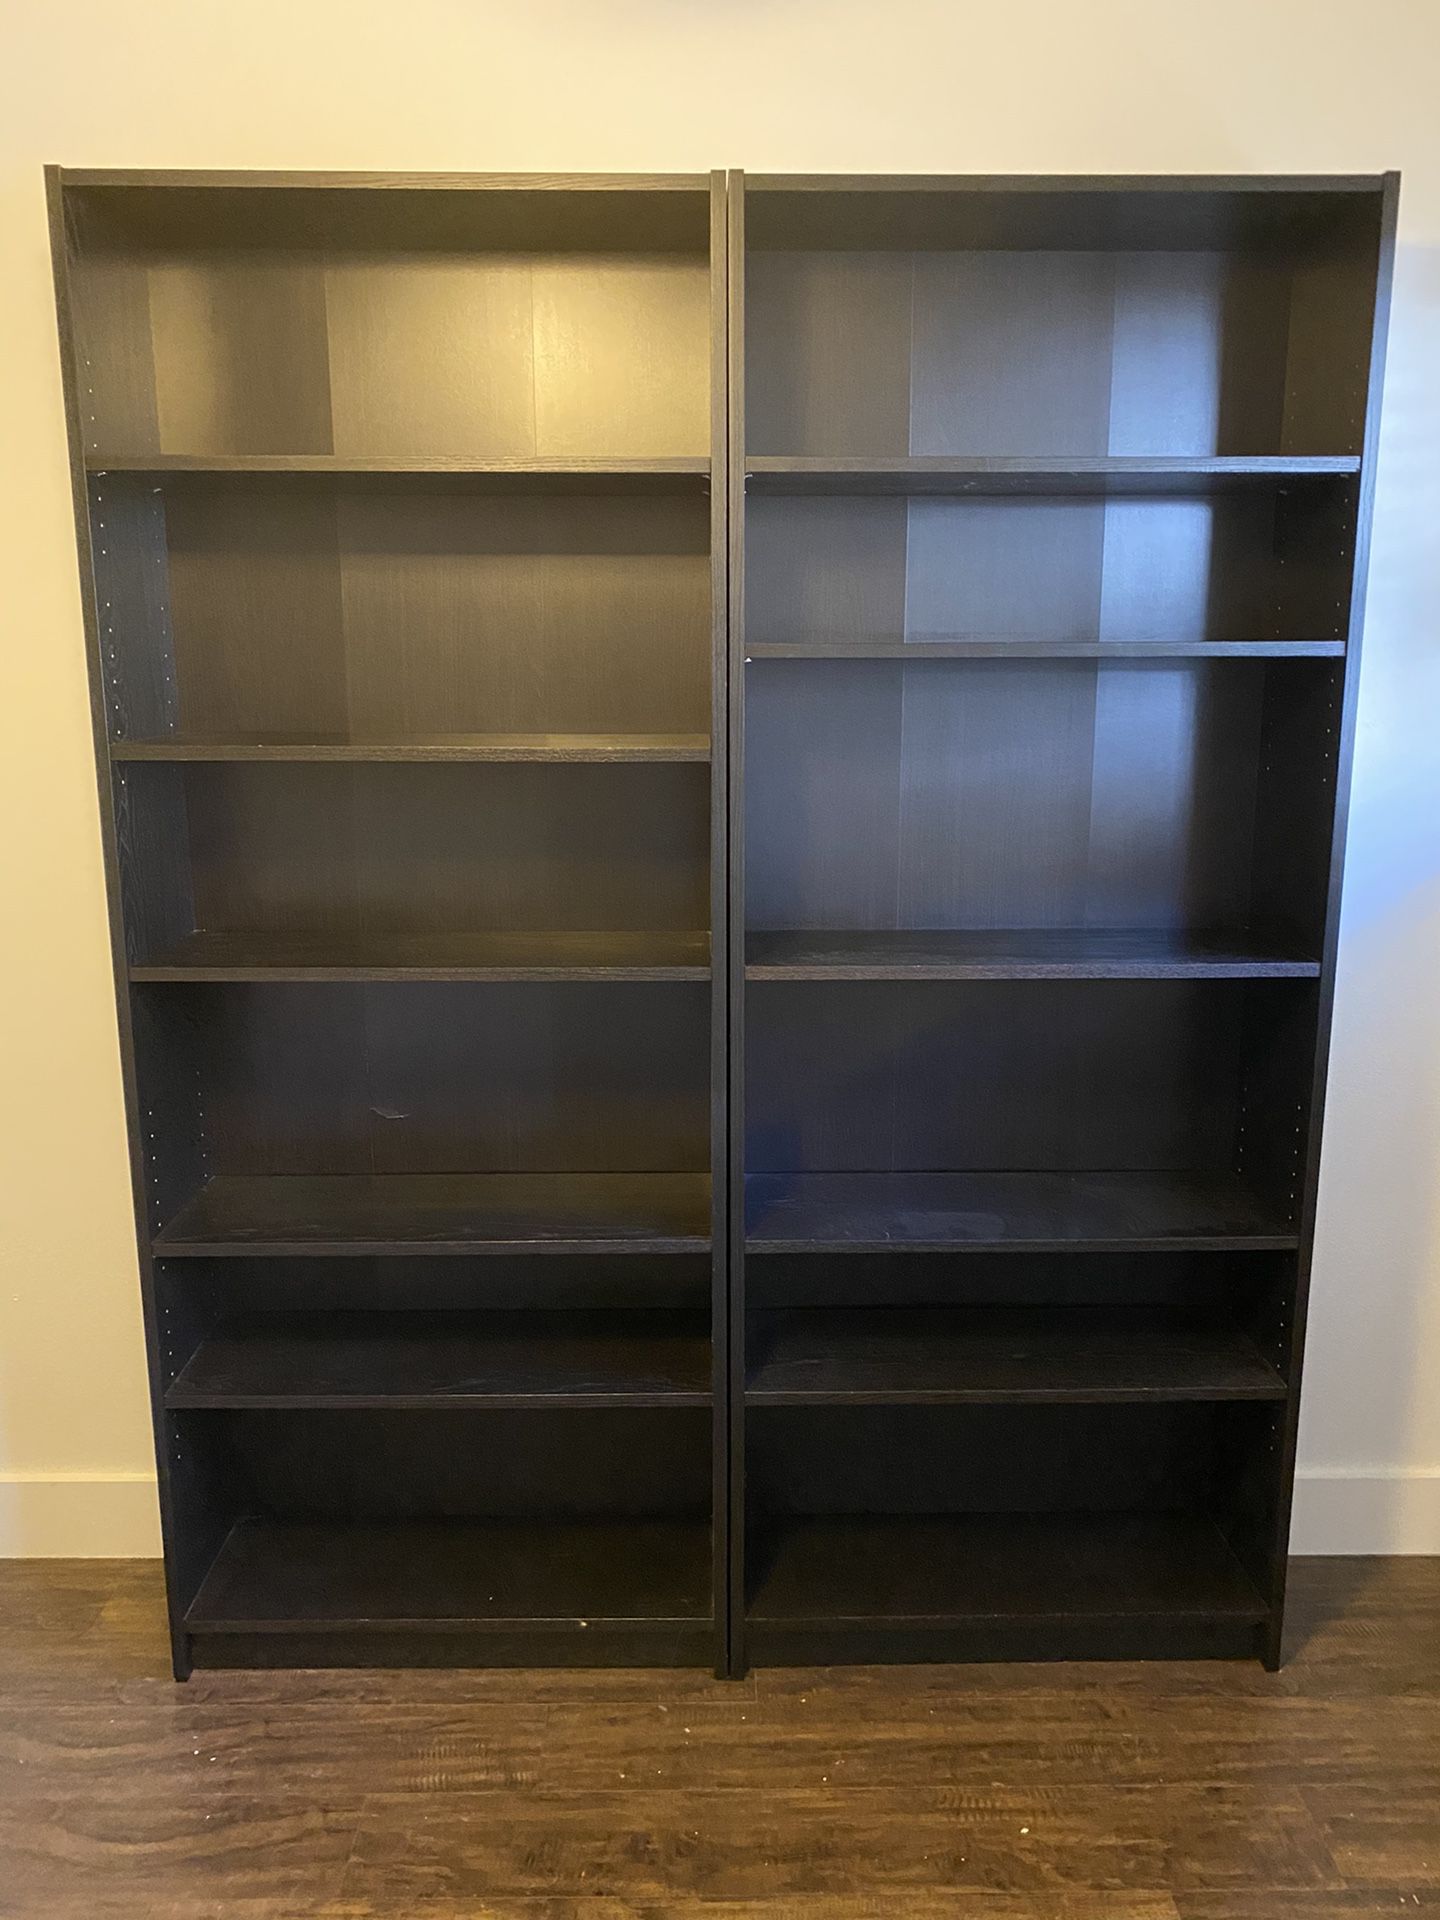 3 IKEA wooden shelves (1 not shown) in great condition with adjustable and removable shelves